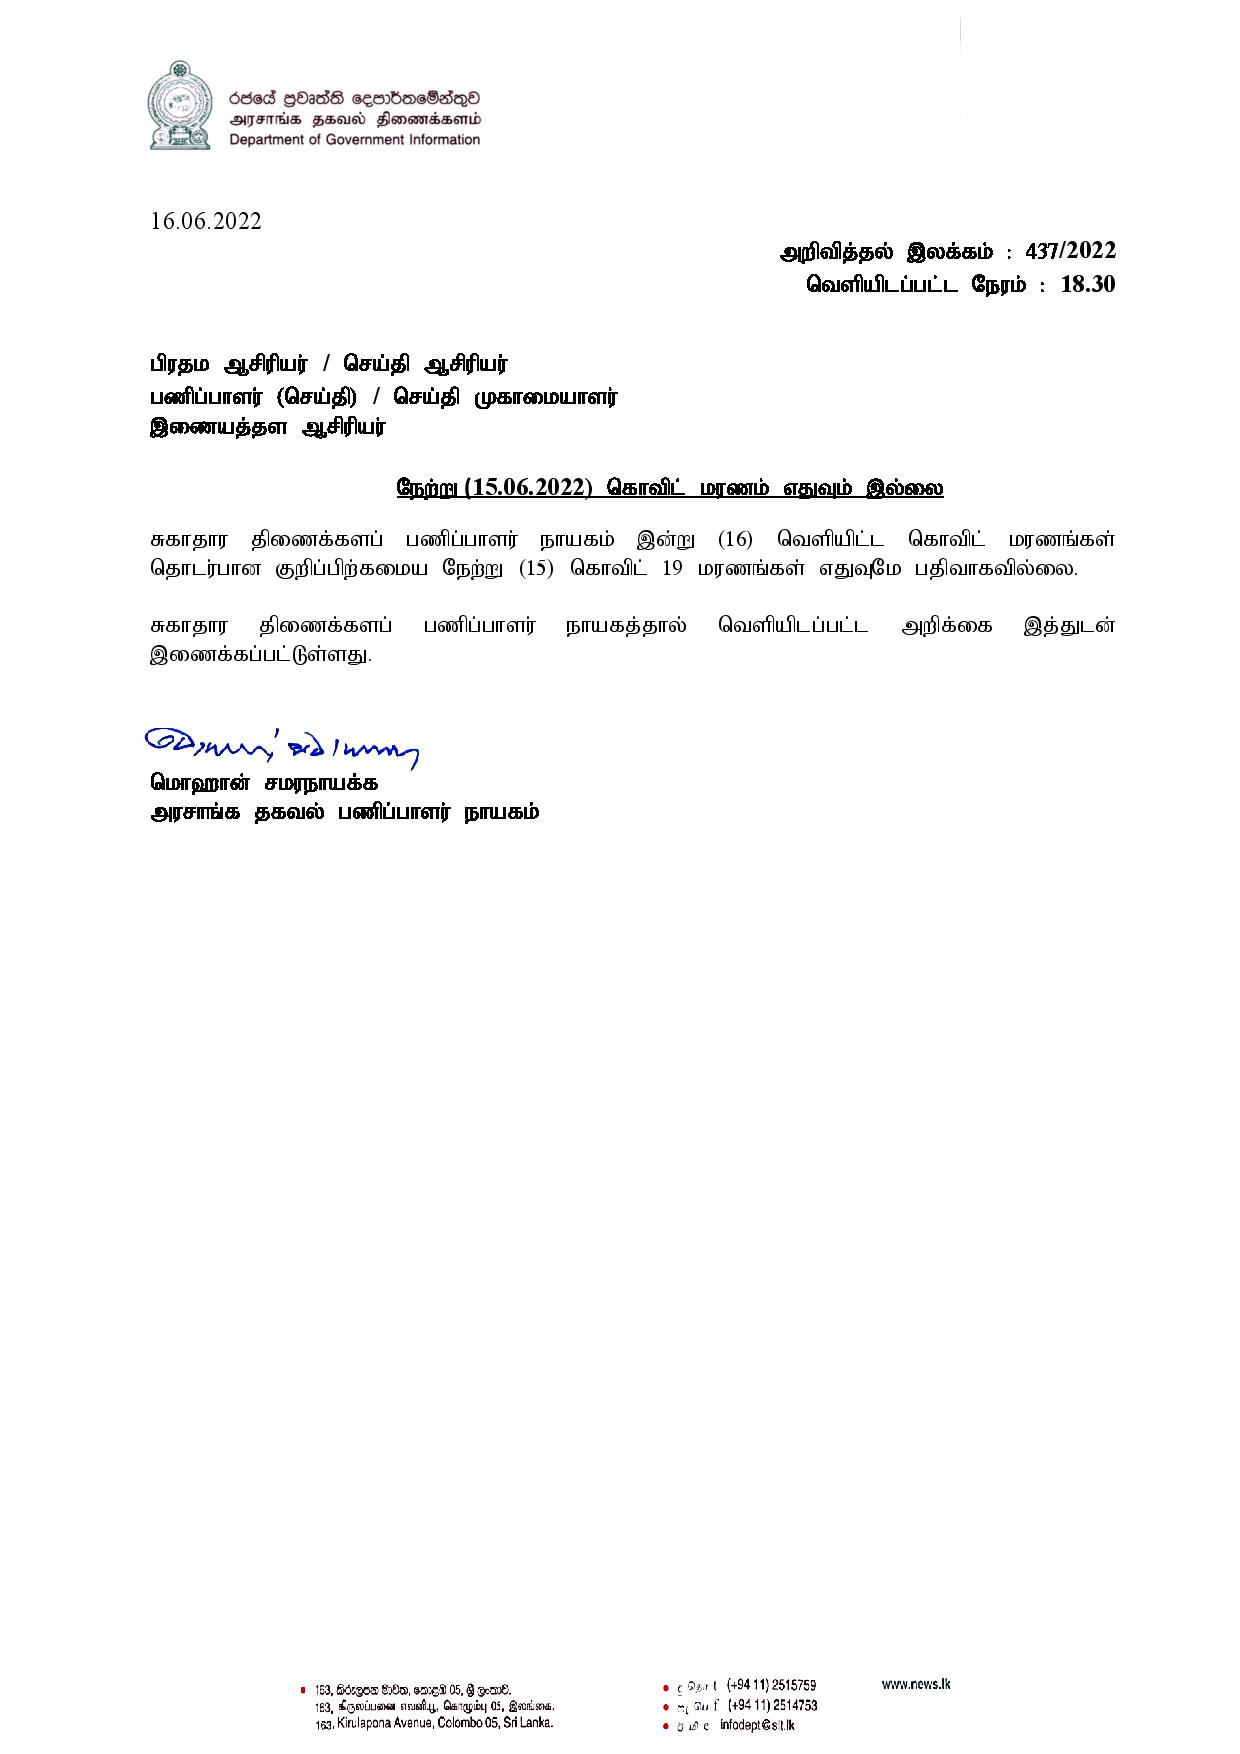 Release No 437 Tamil page 001